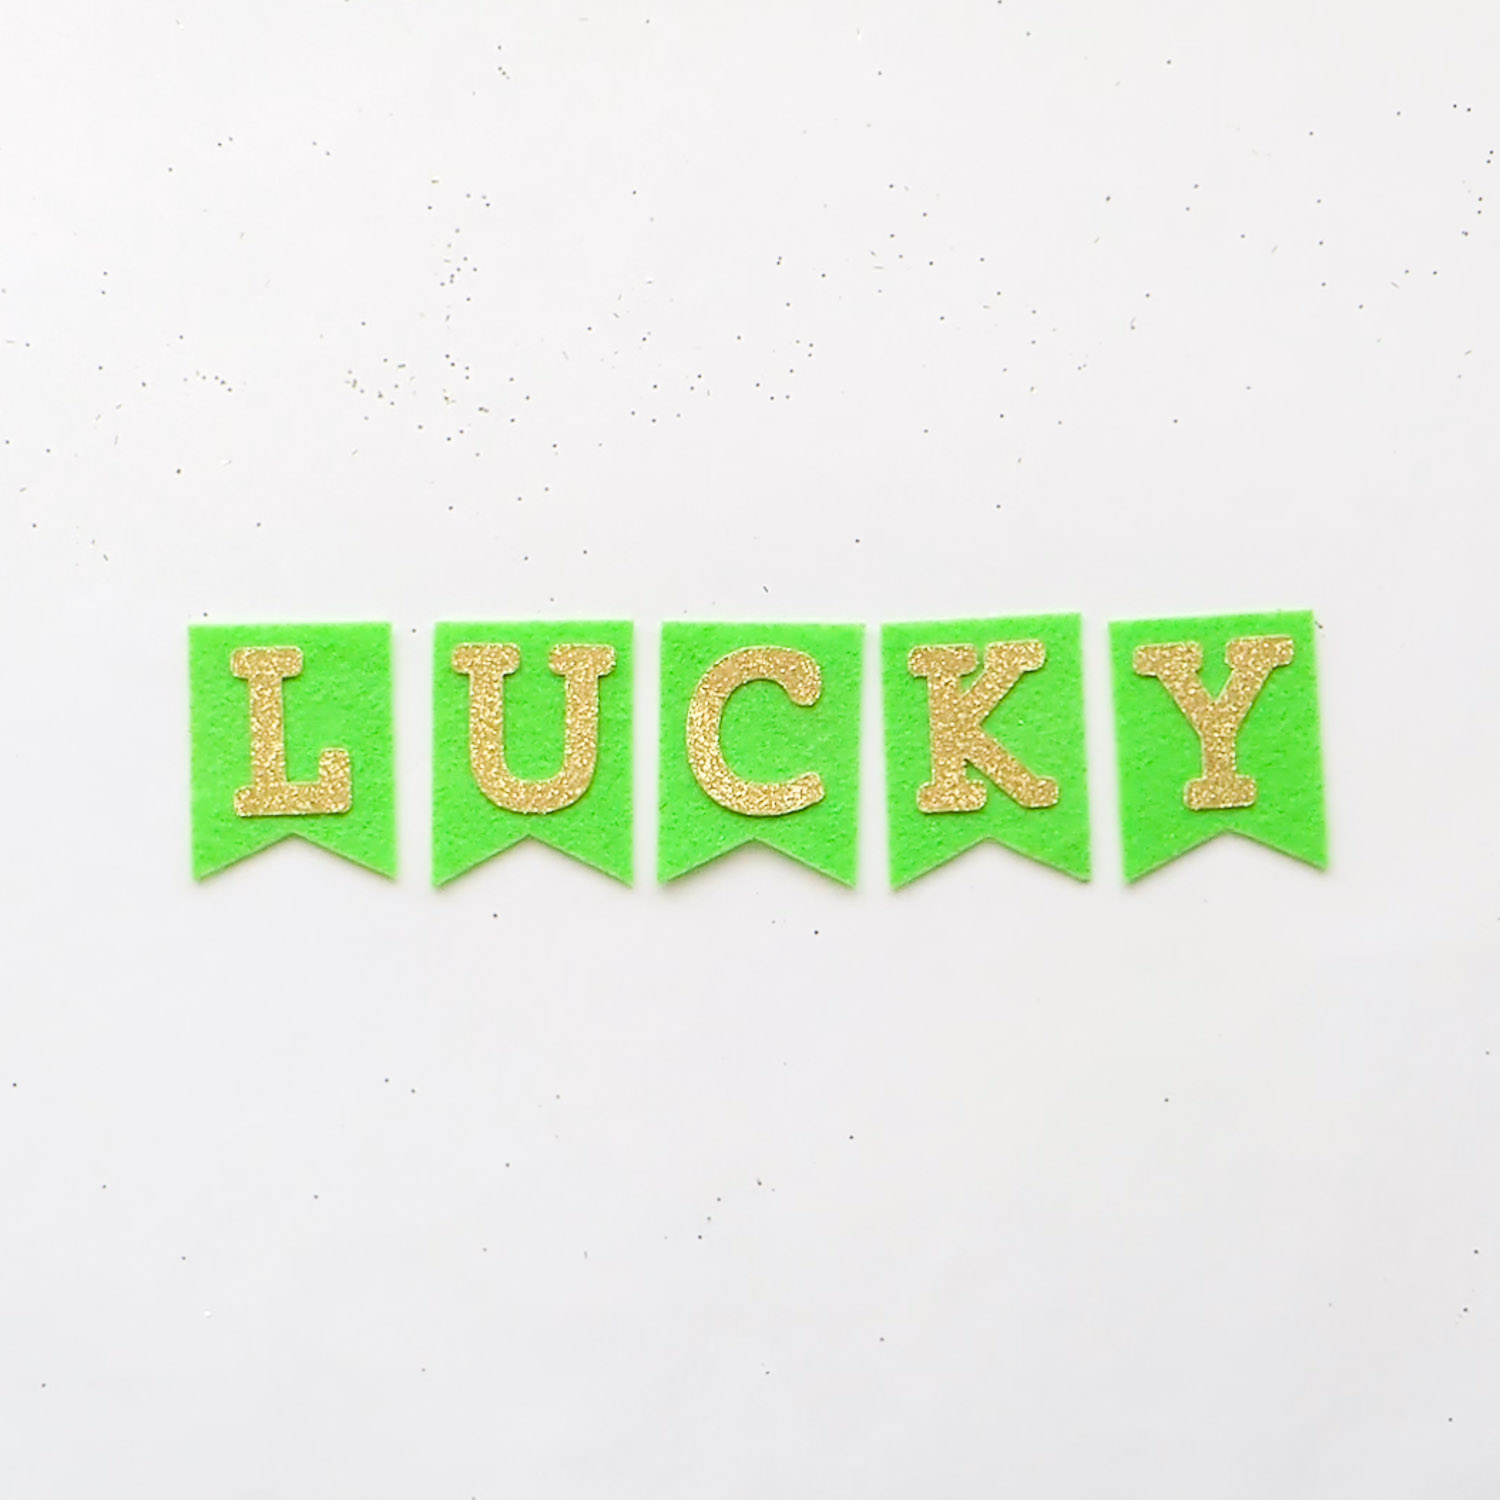 Lime green felt pennants with attached gold glitter letters spelling "LUCKY".